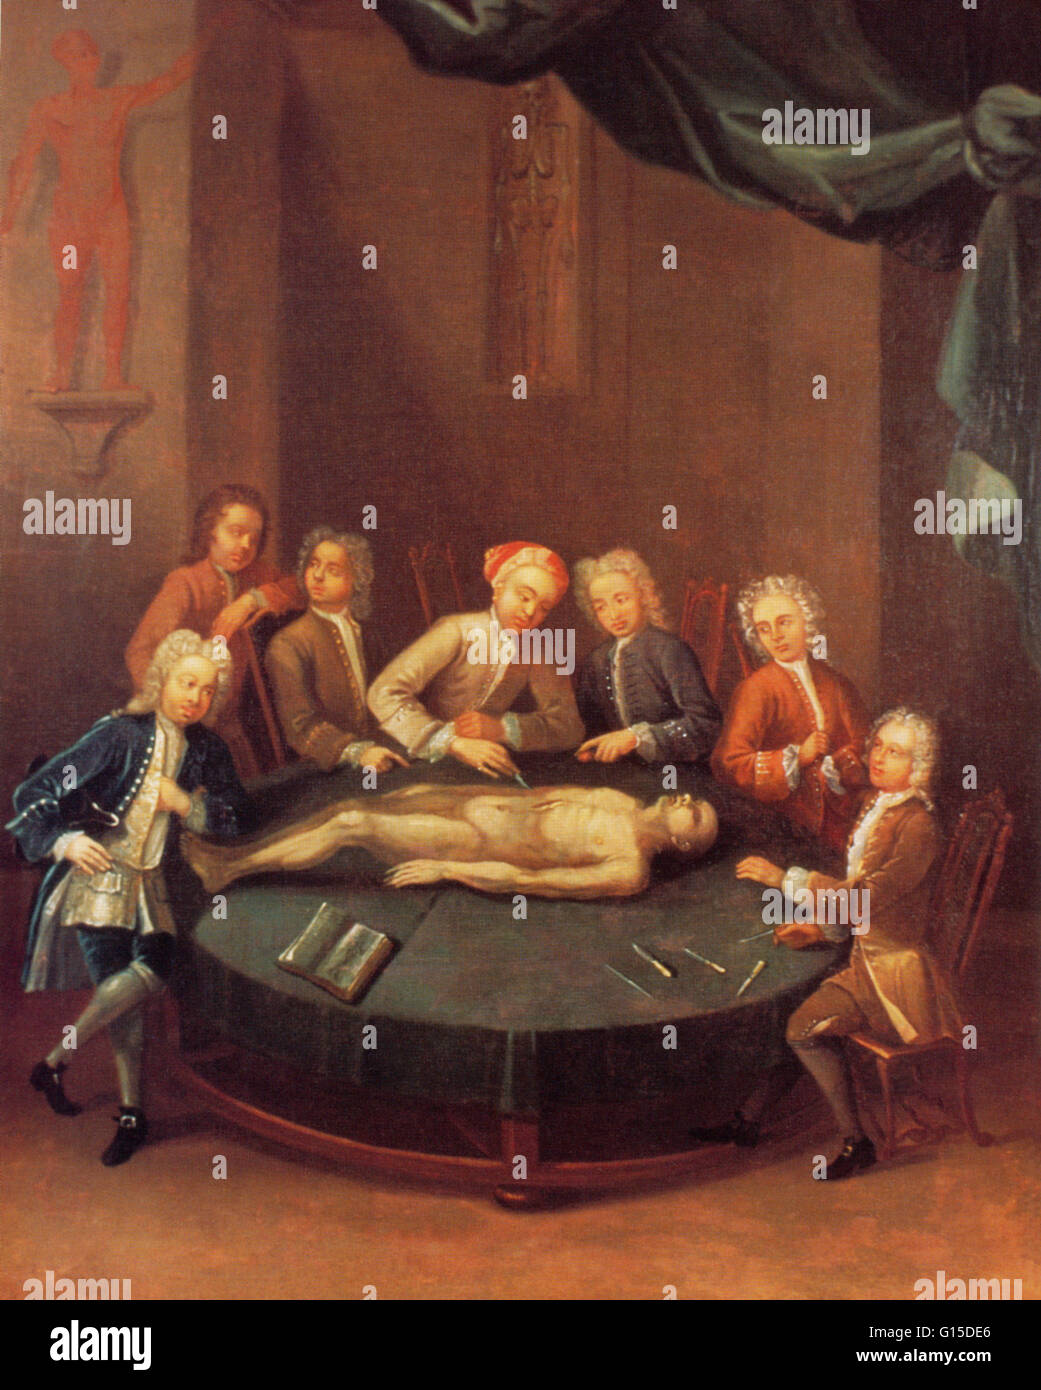 English surgeon and teacher of anatomy and surgery William Cheselden (1688 - 1752) performing a dissection at the Barber-Surgeons' Hall, circa 1730. An anonymous oil painting by an artist of limited skill. Cheselden is wearing his turban, which he preferr Stock Photo